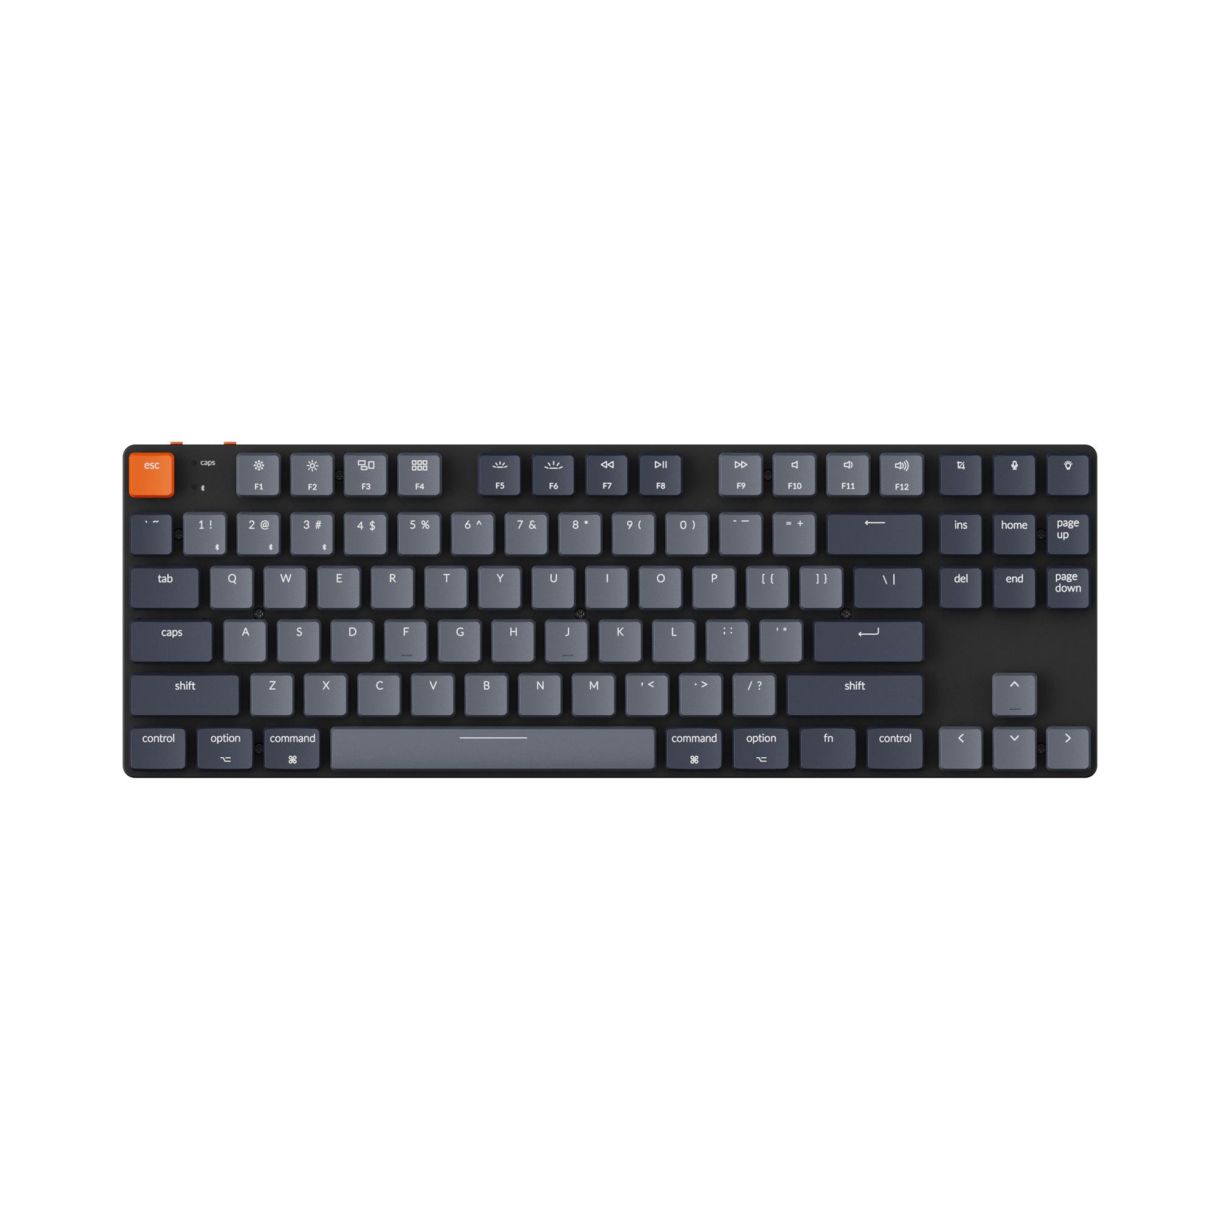 Mus Grijpen Stuwkracht Mechanical Keyboard Keychron K1 SE TKL Hot-Swappable Low Profile Keychron  Optical Red Switch - White Backlight, Aluminium and Plastic Frame